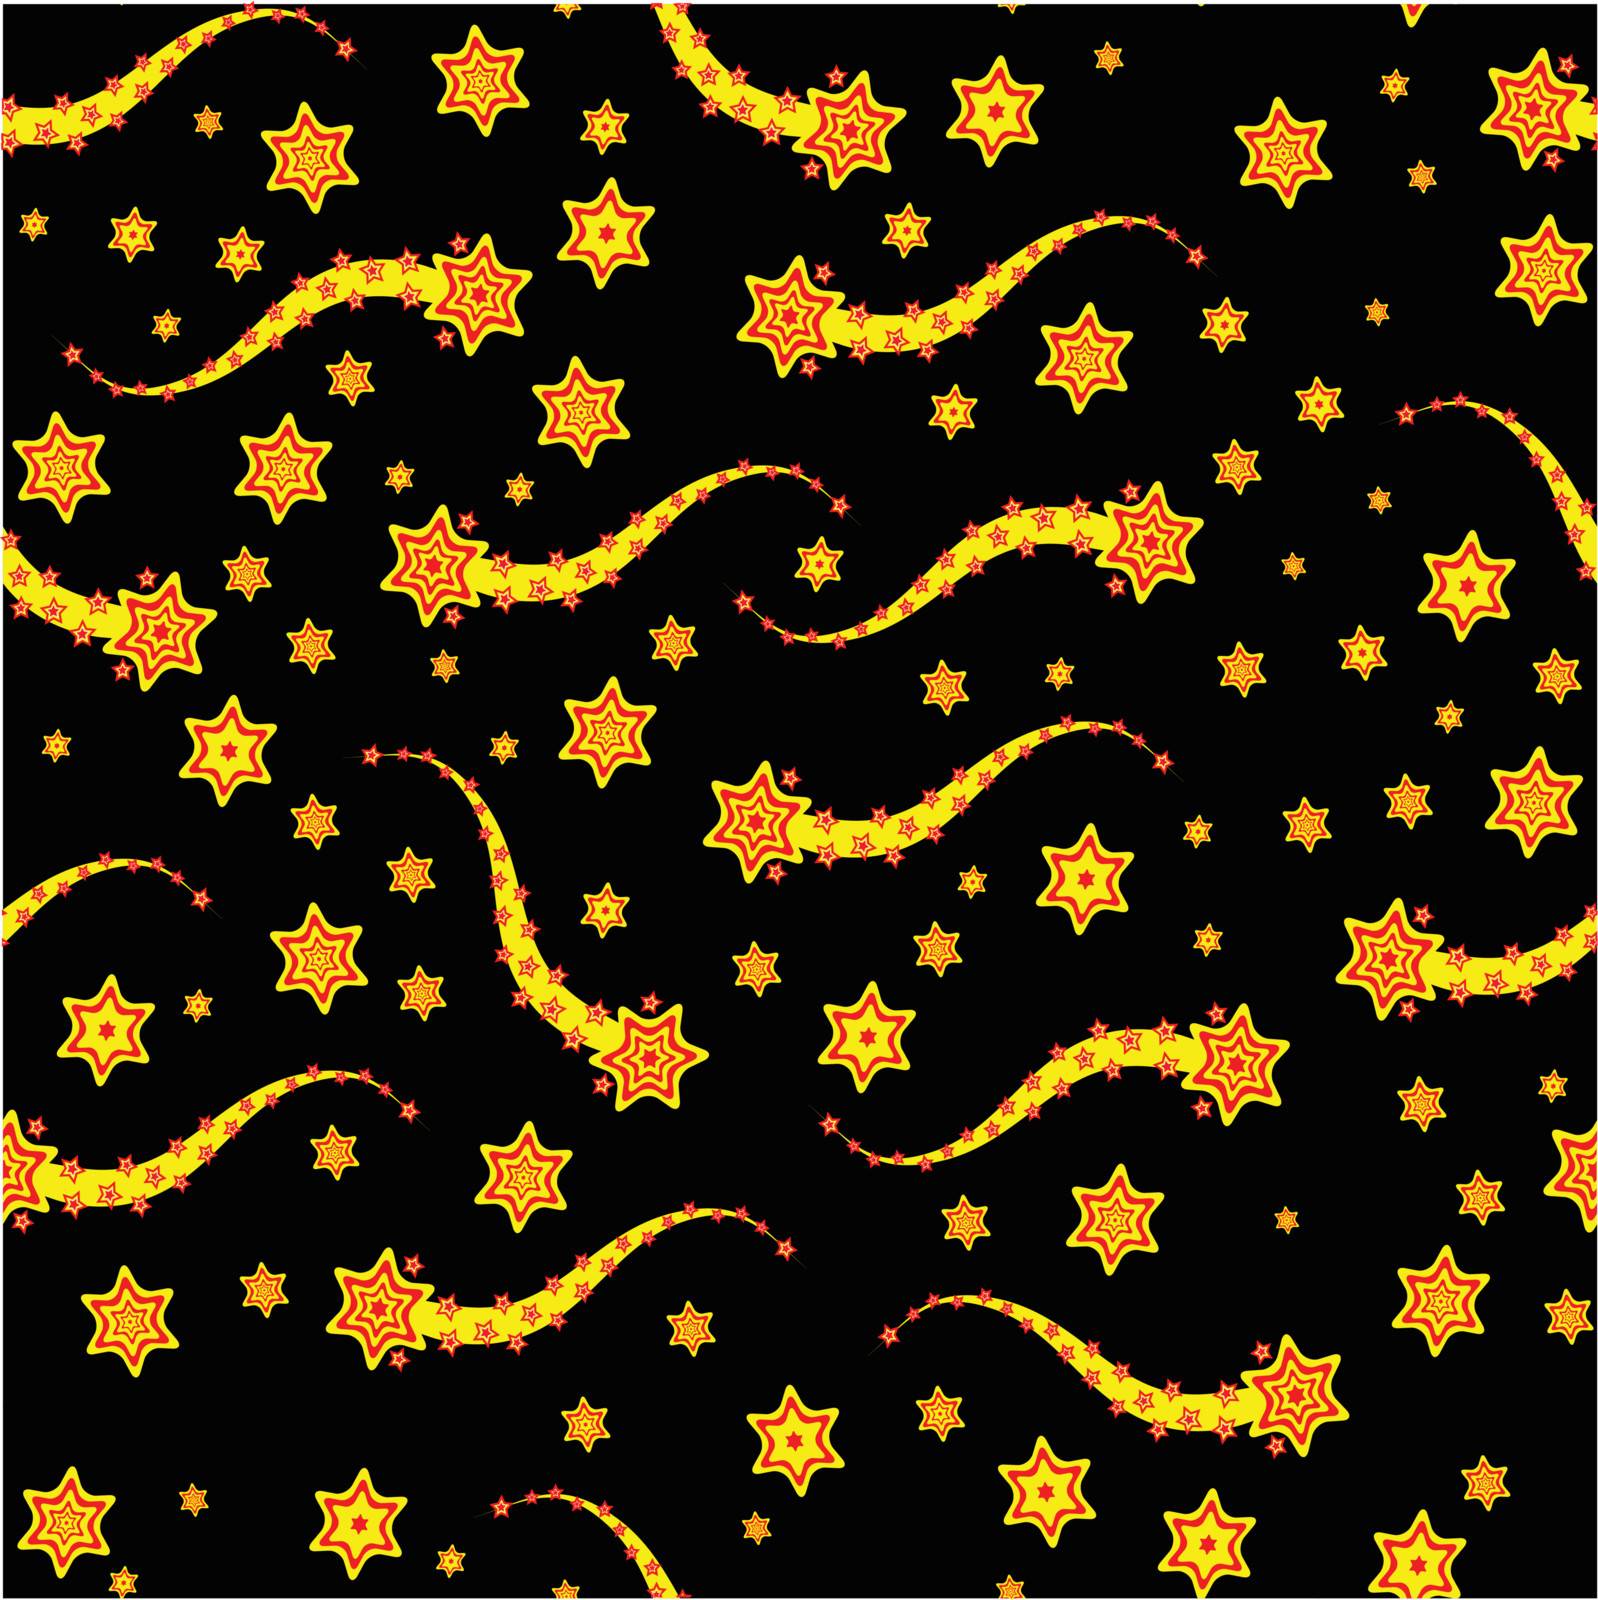 A red and yellow funky seamless background with stars and comets on a black base